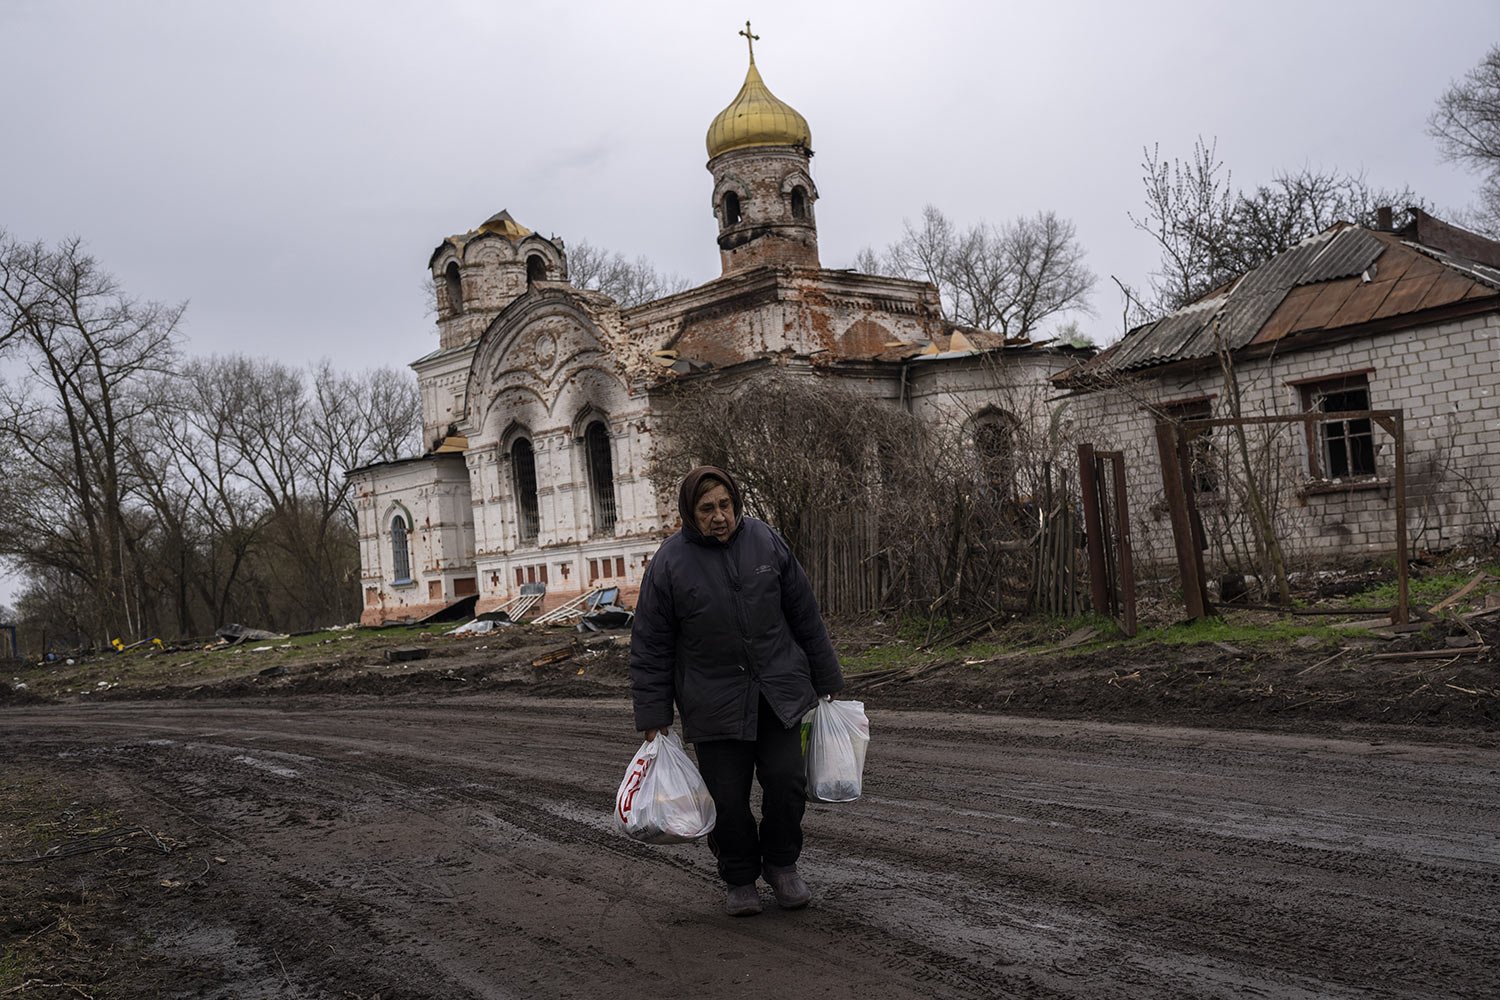  Valentyna Bushtruk, 70, walks in front of a damaged church in Lukashivka in northern Ukraine, Friday, April 22, 2022. Residents said Russian soldiers used the house of worship for storing ammunition and that Ukrainian forces shelled the building to 